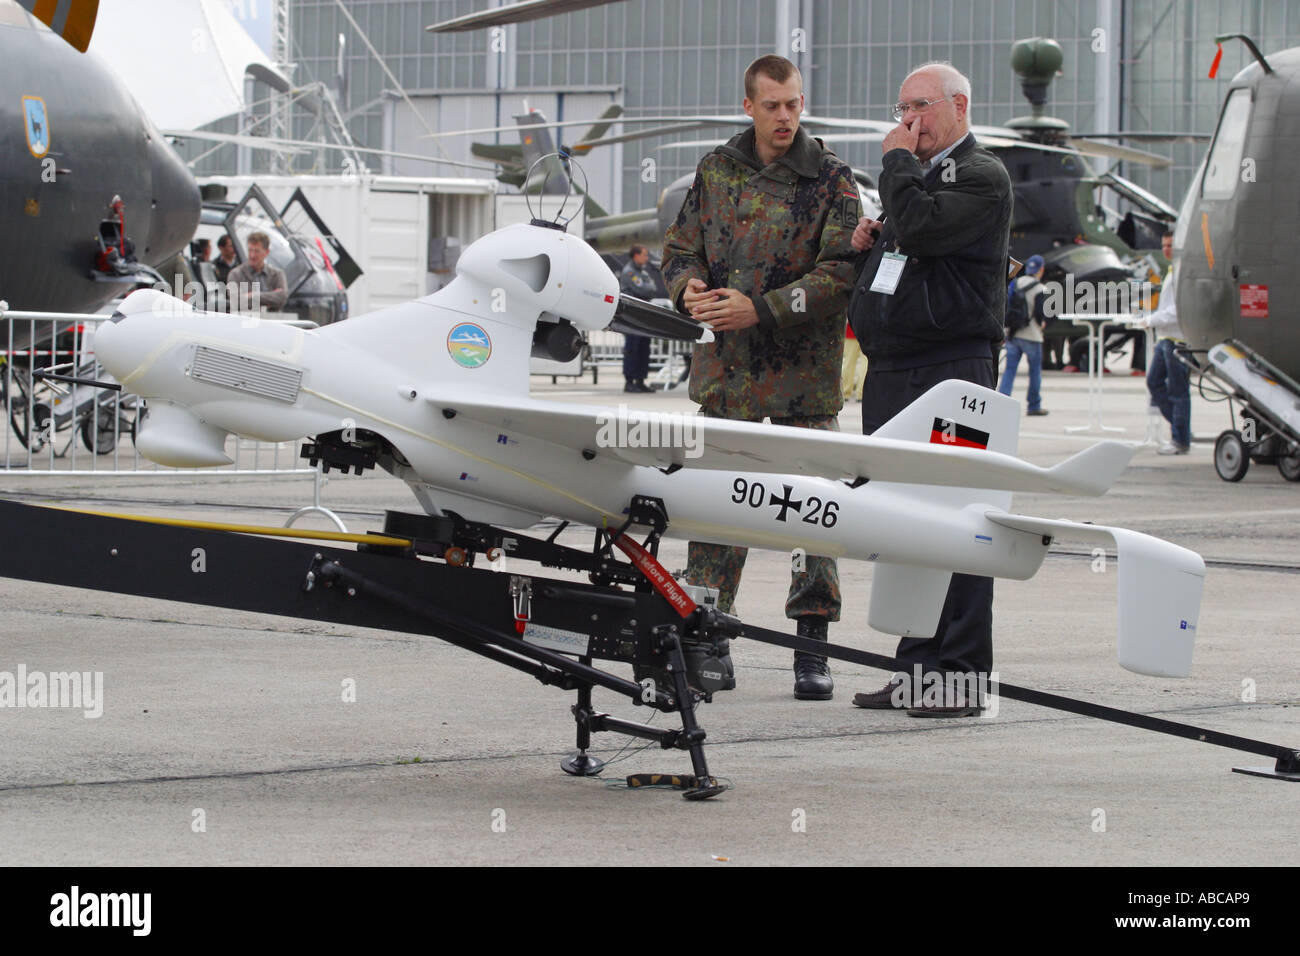 Military UAV drone reconnaissance aircraft built by EMT Luna operated by the German Air Force at military arms trade show 2006 Stock Photo